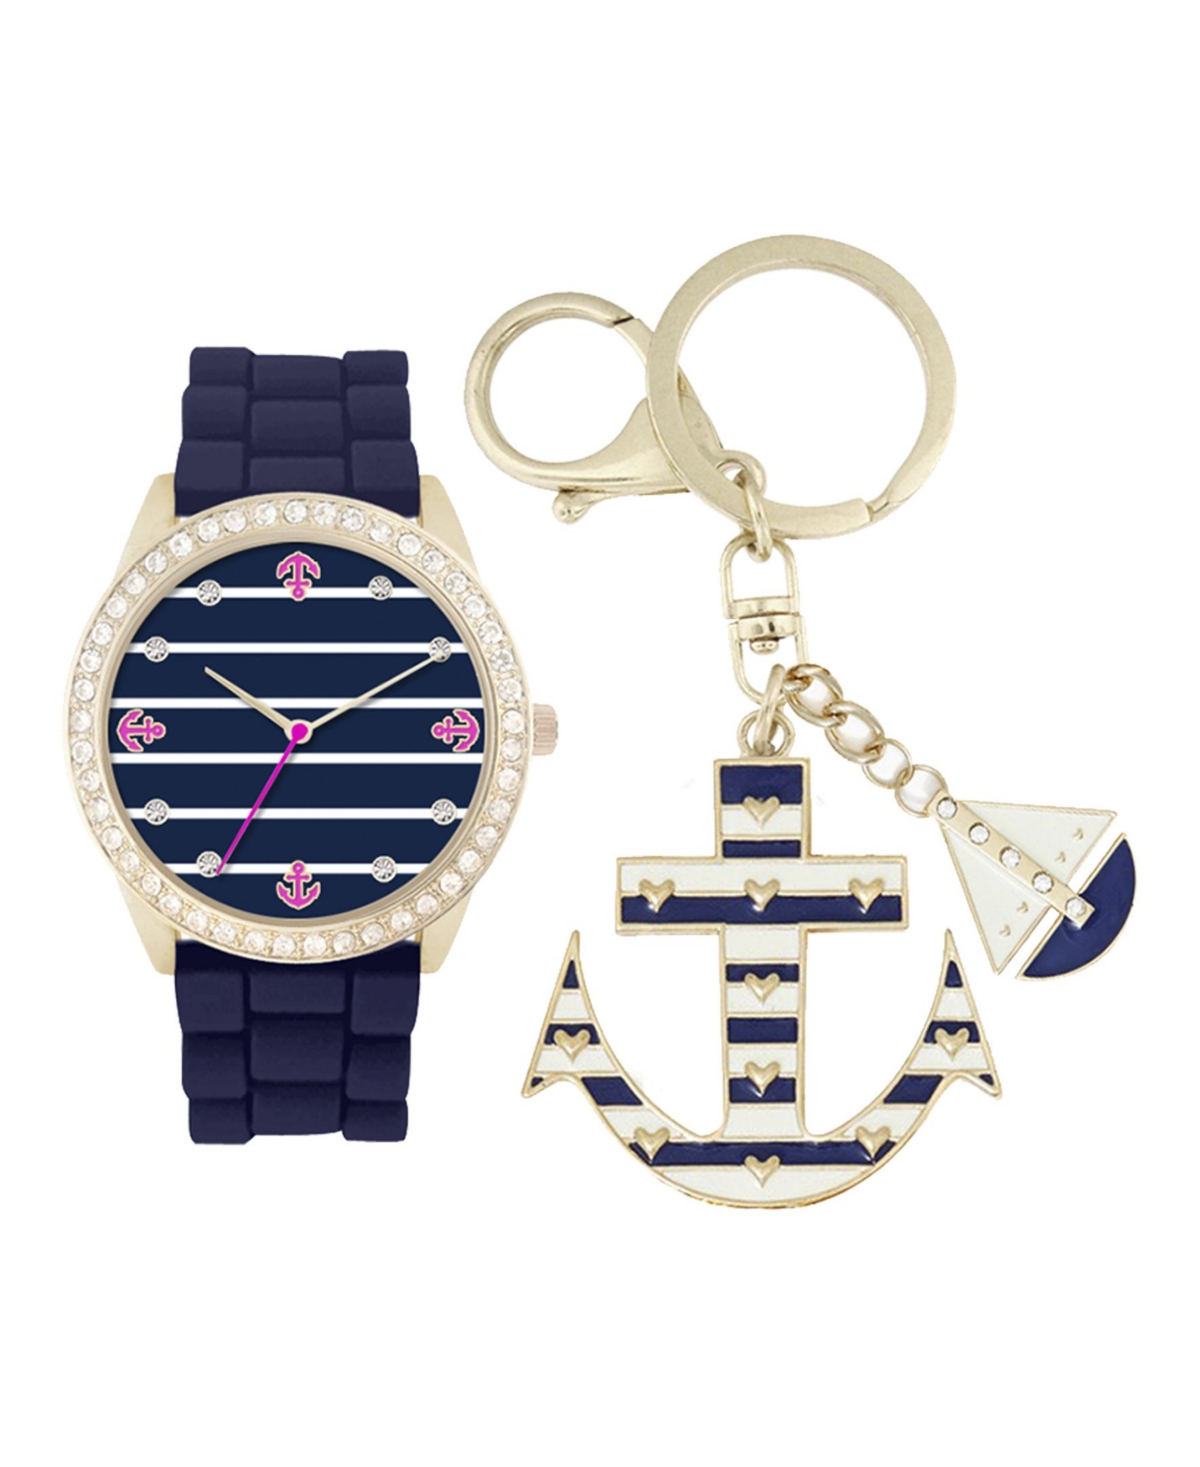 Jessica Carlyle Women's Analog Navy Sailor Strap Watch 34mm with Anchor and Boat Key Chain Cubic Zirconia Gift Set